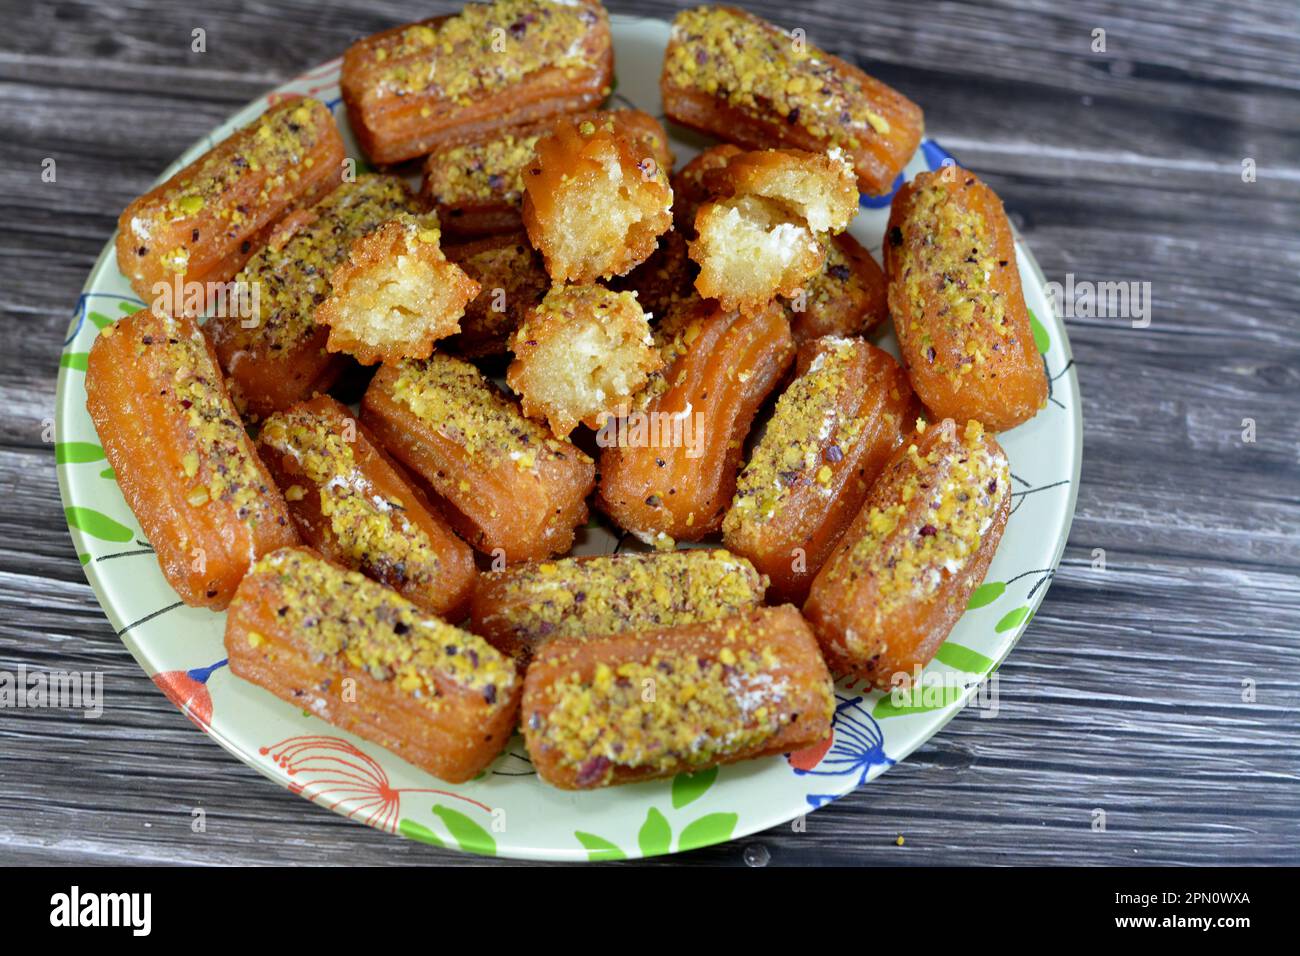 Tulumba, Bamiyeh or Balah El Sham stuffued with whipped cream and covered with pistachios and nuts, deep fried batter dessert soaked in syrup, similar Stock Photo